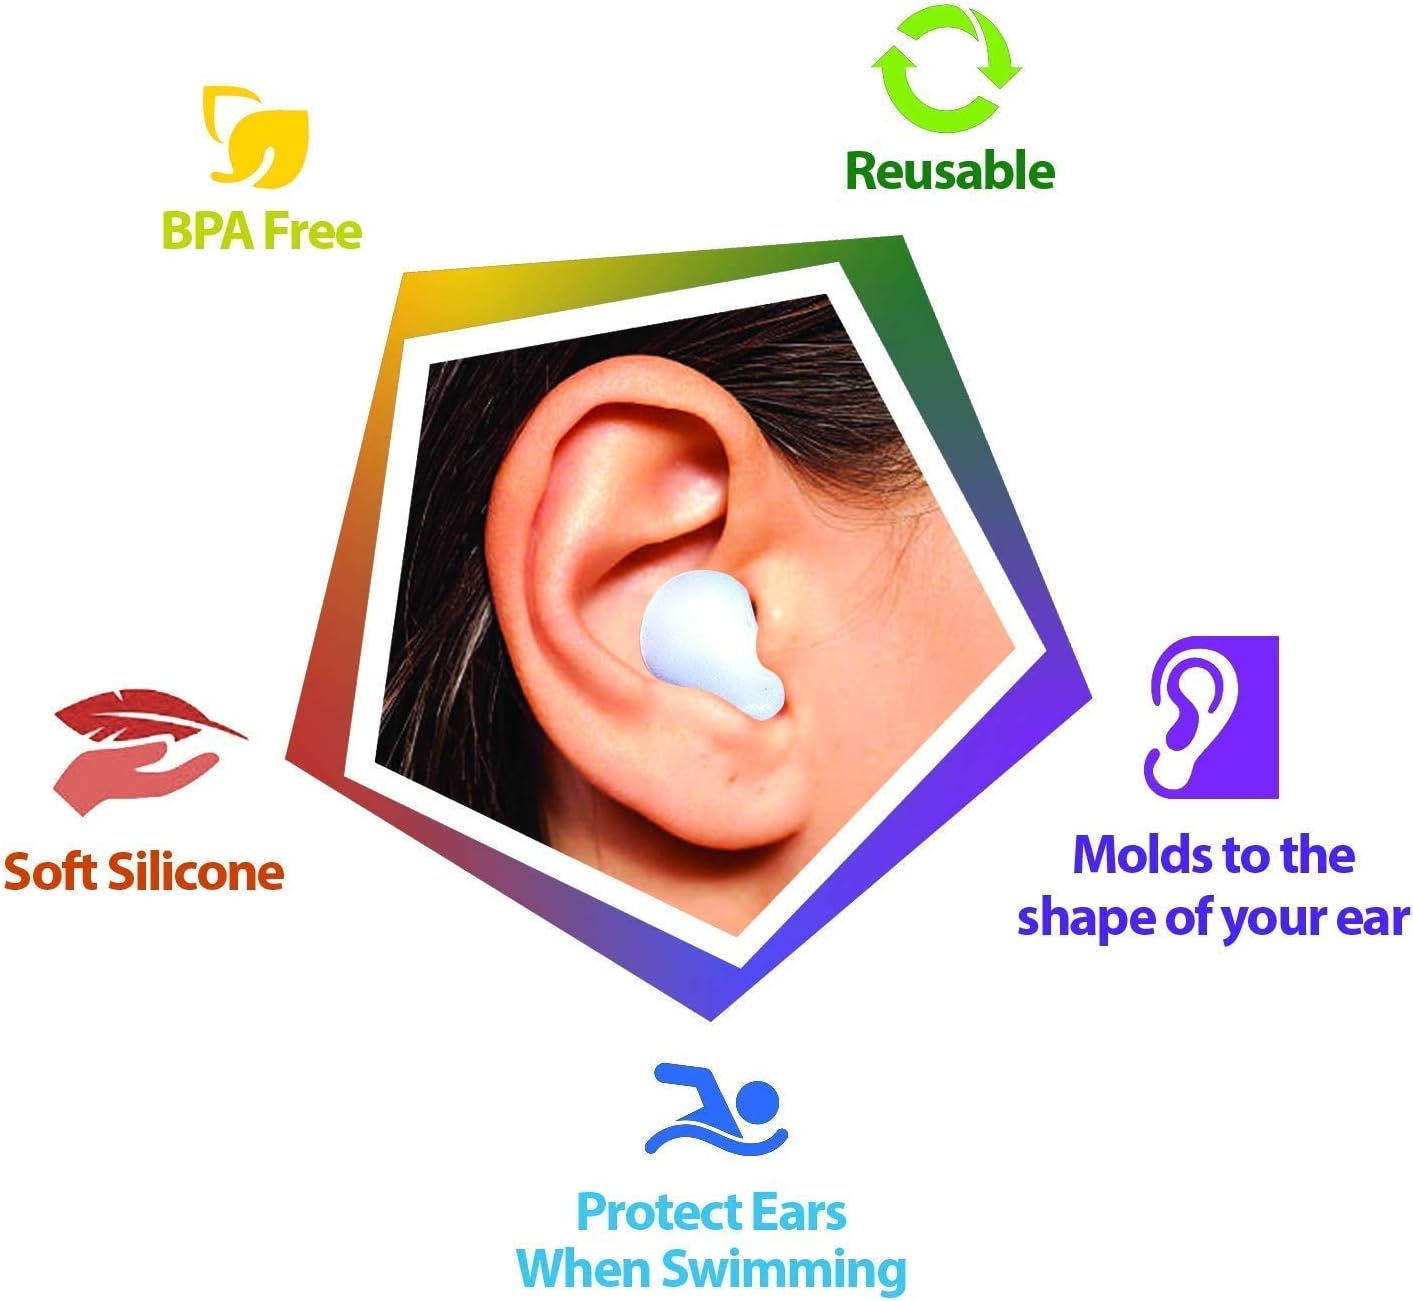 Ear Plugs for Sleeping from Better Sleep - Moldable Silicone, Swimming, Studying, Snoring, Concerts, Noise Cancelling